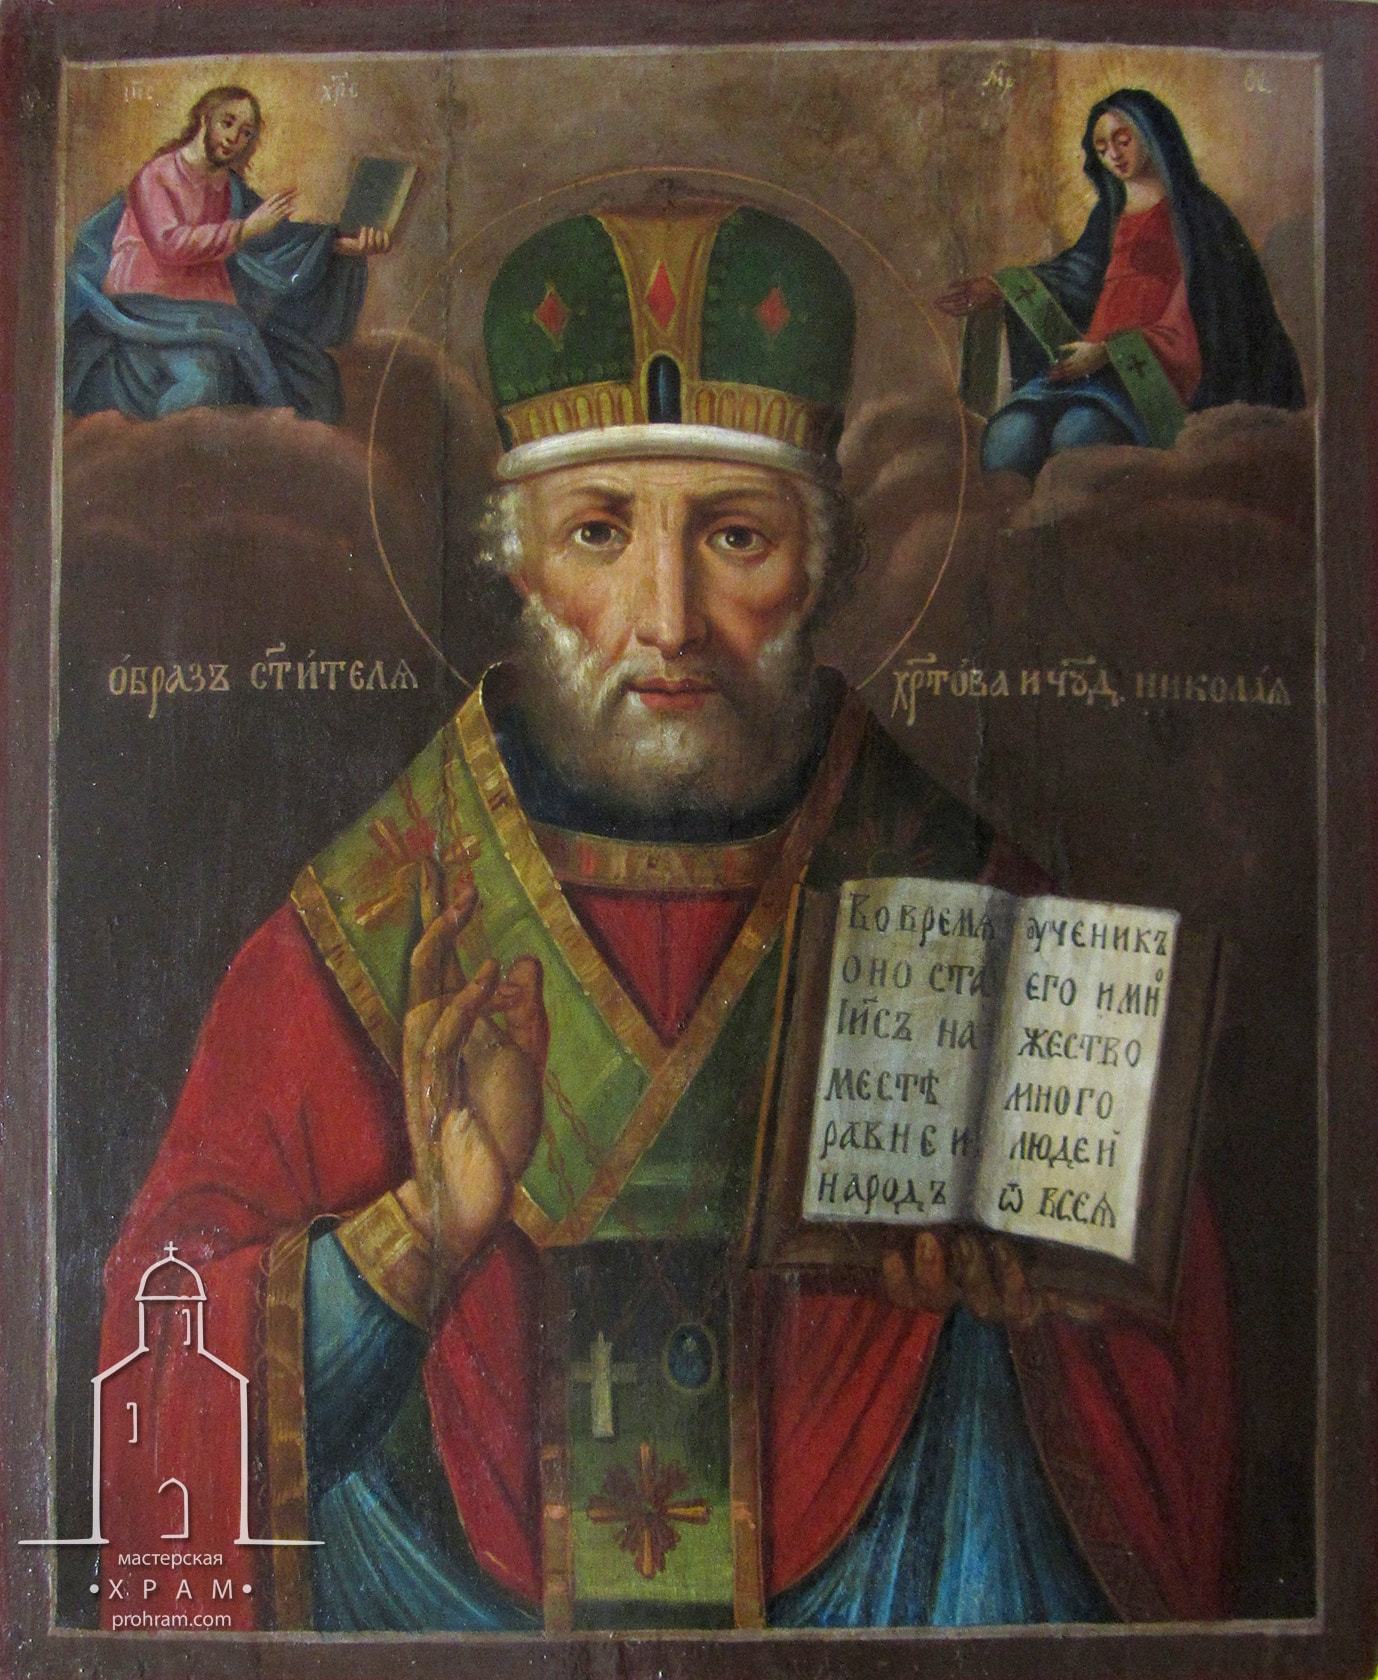 restoration, restoration of icons, restoration of icons stages,Icon of St. Nicholas the Wonderworker, mid-19th century.